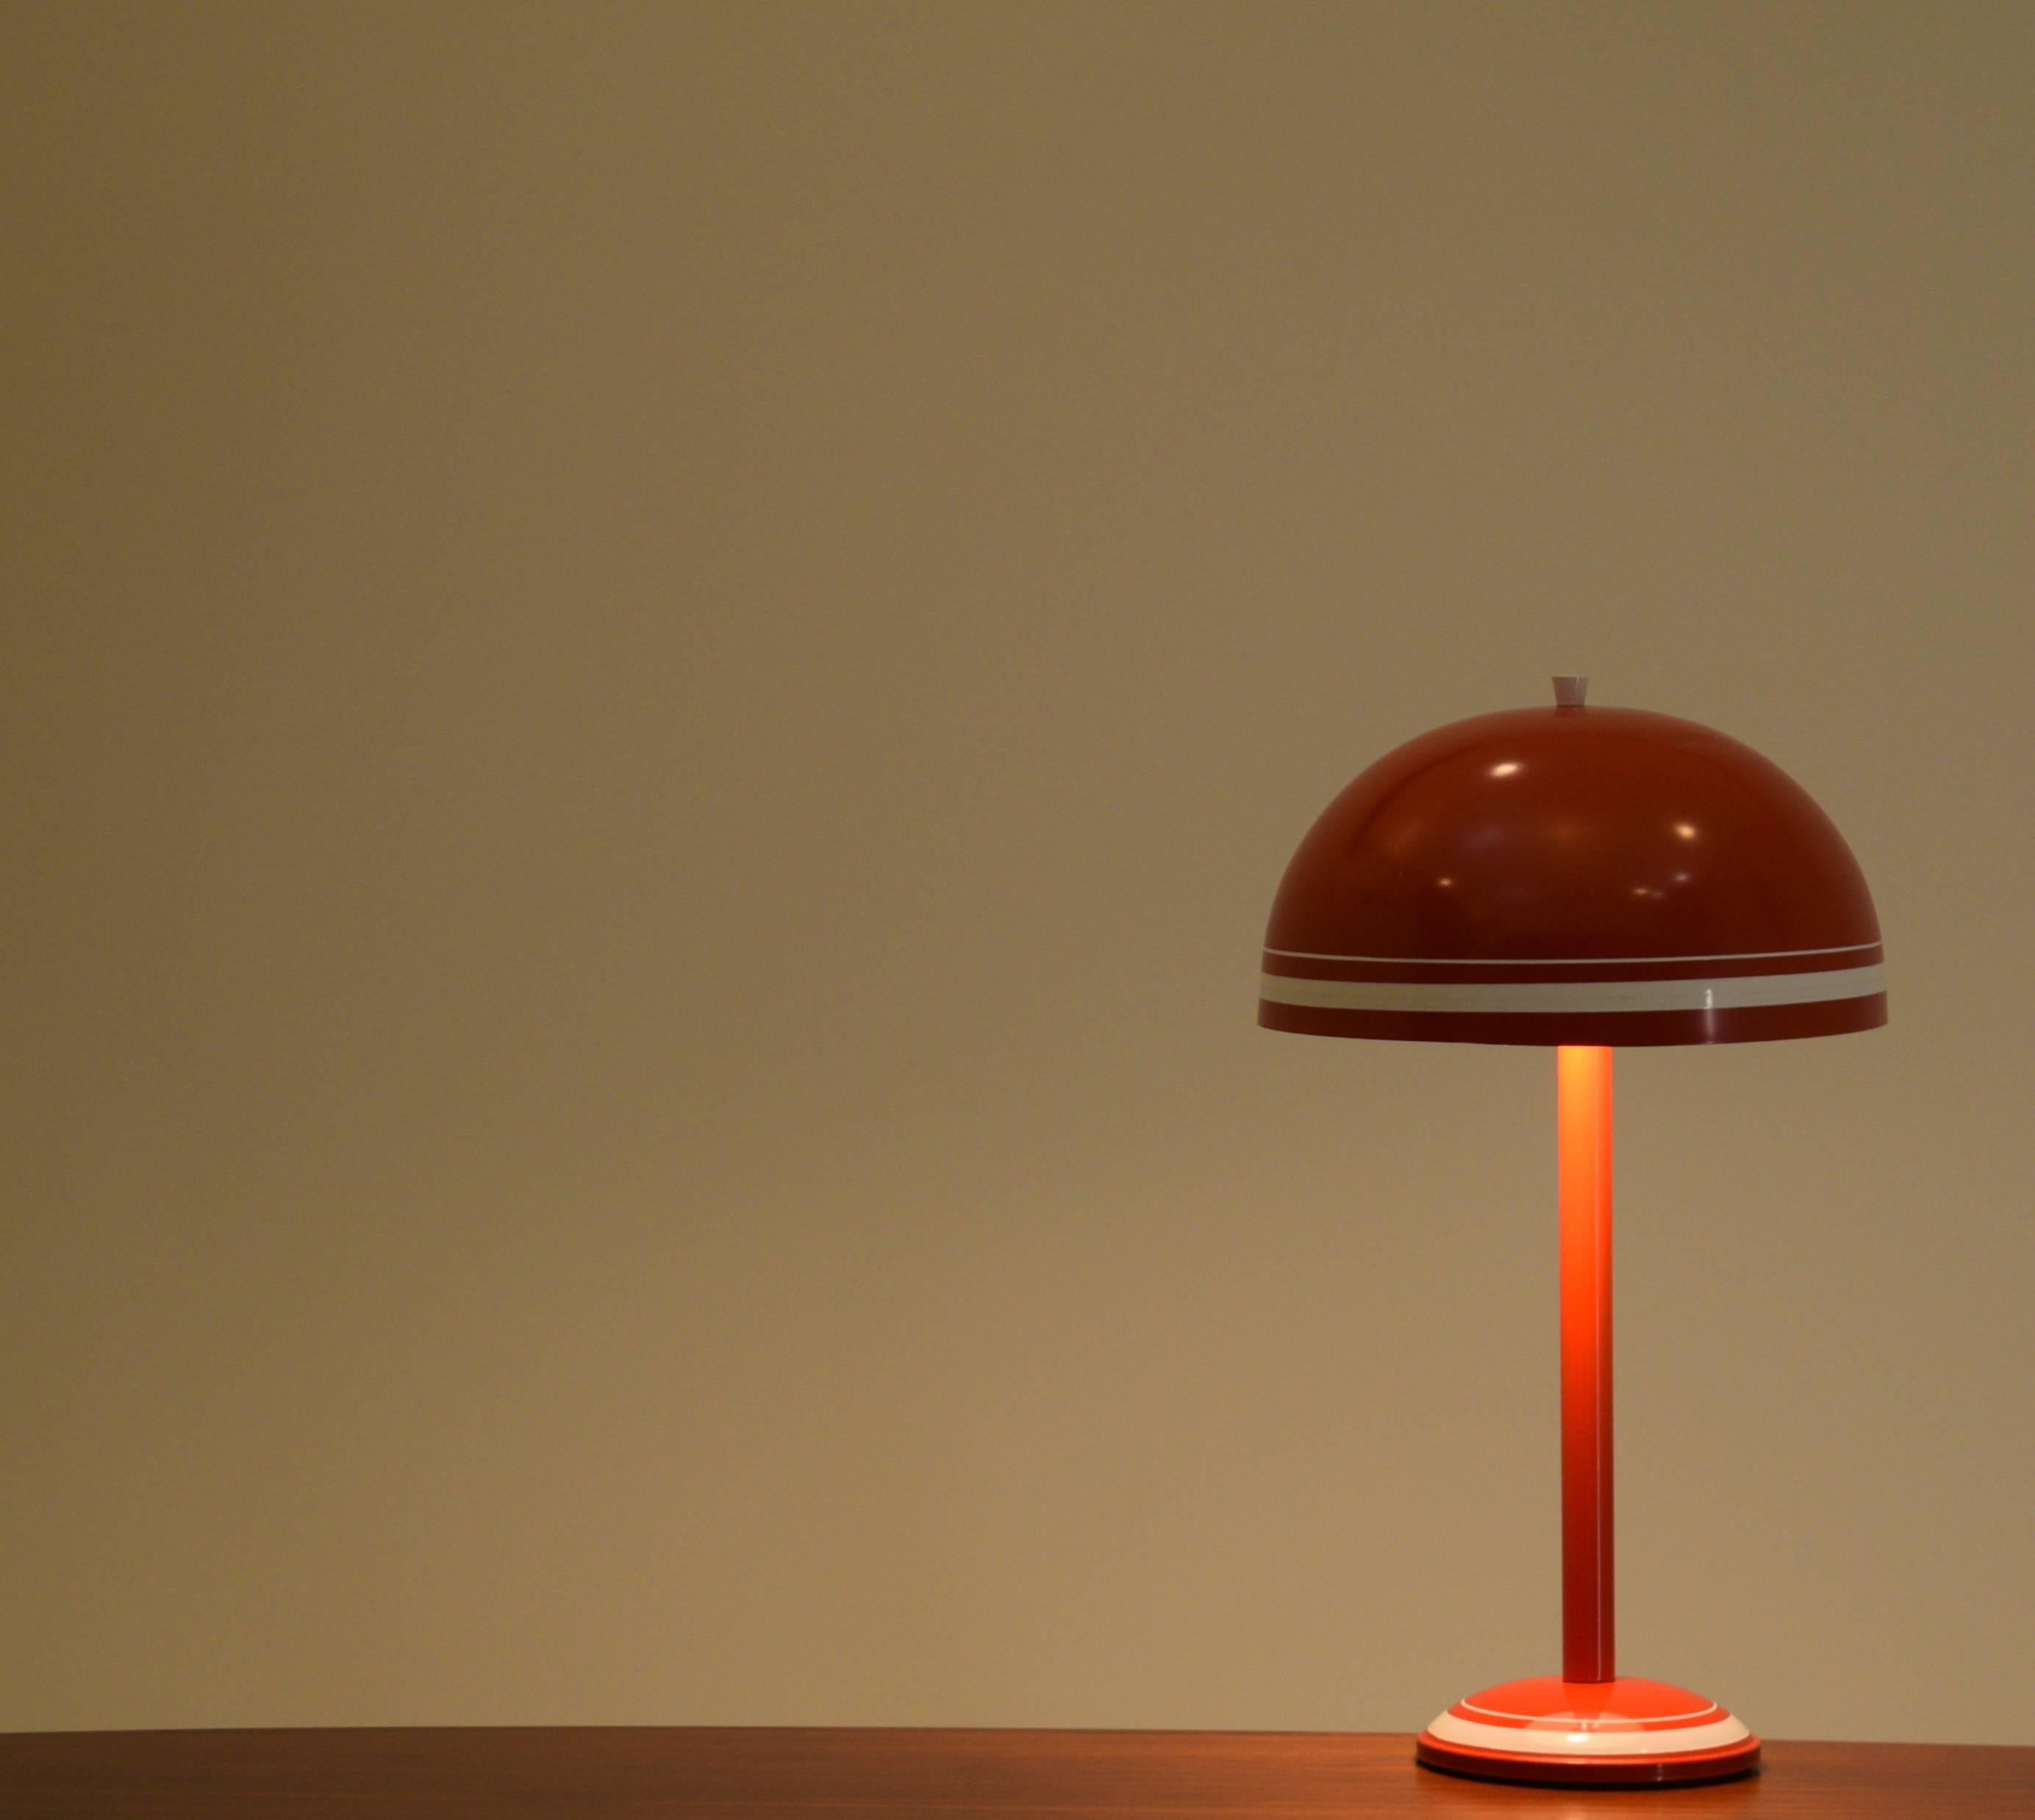 An all-steel construction mushroom lamp from the 1970s. Has two power sockets located below the mushroom shade. On/off power switch located on cord. In brilliant red with white strips. In excellent condition. 

Manufacturer unknown though it is